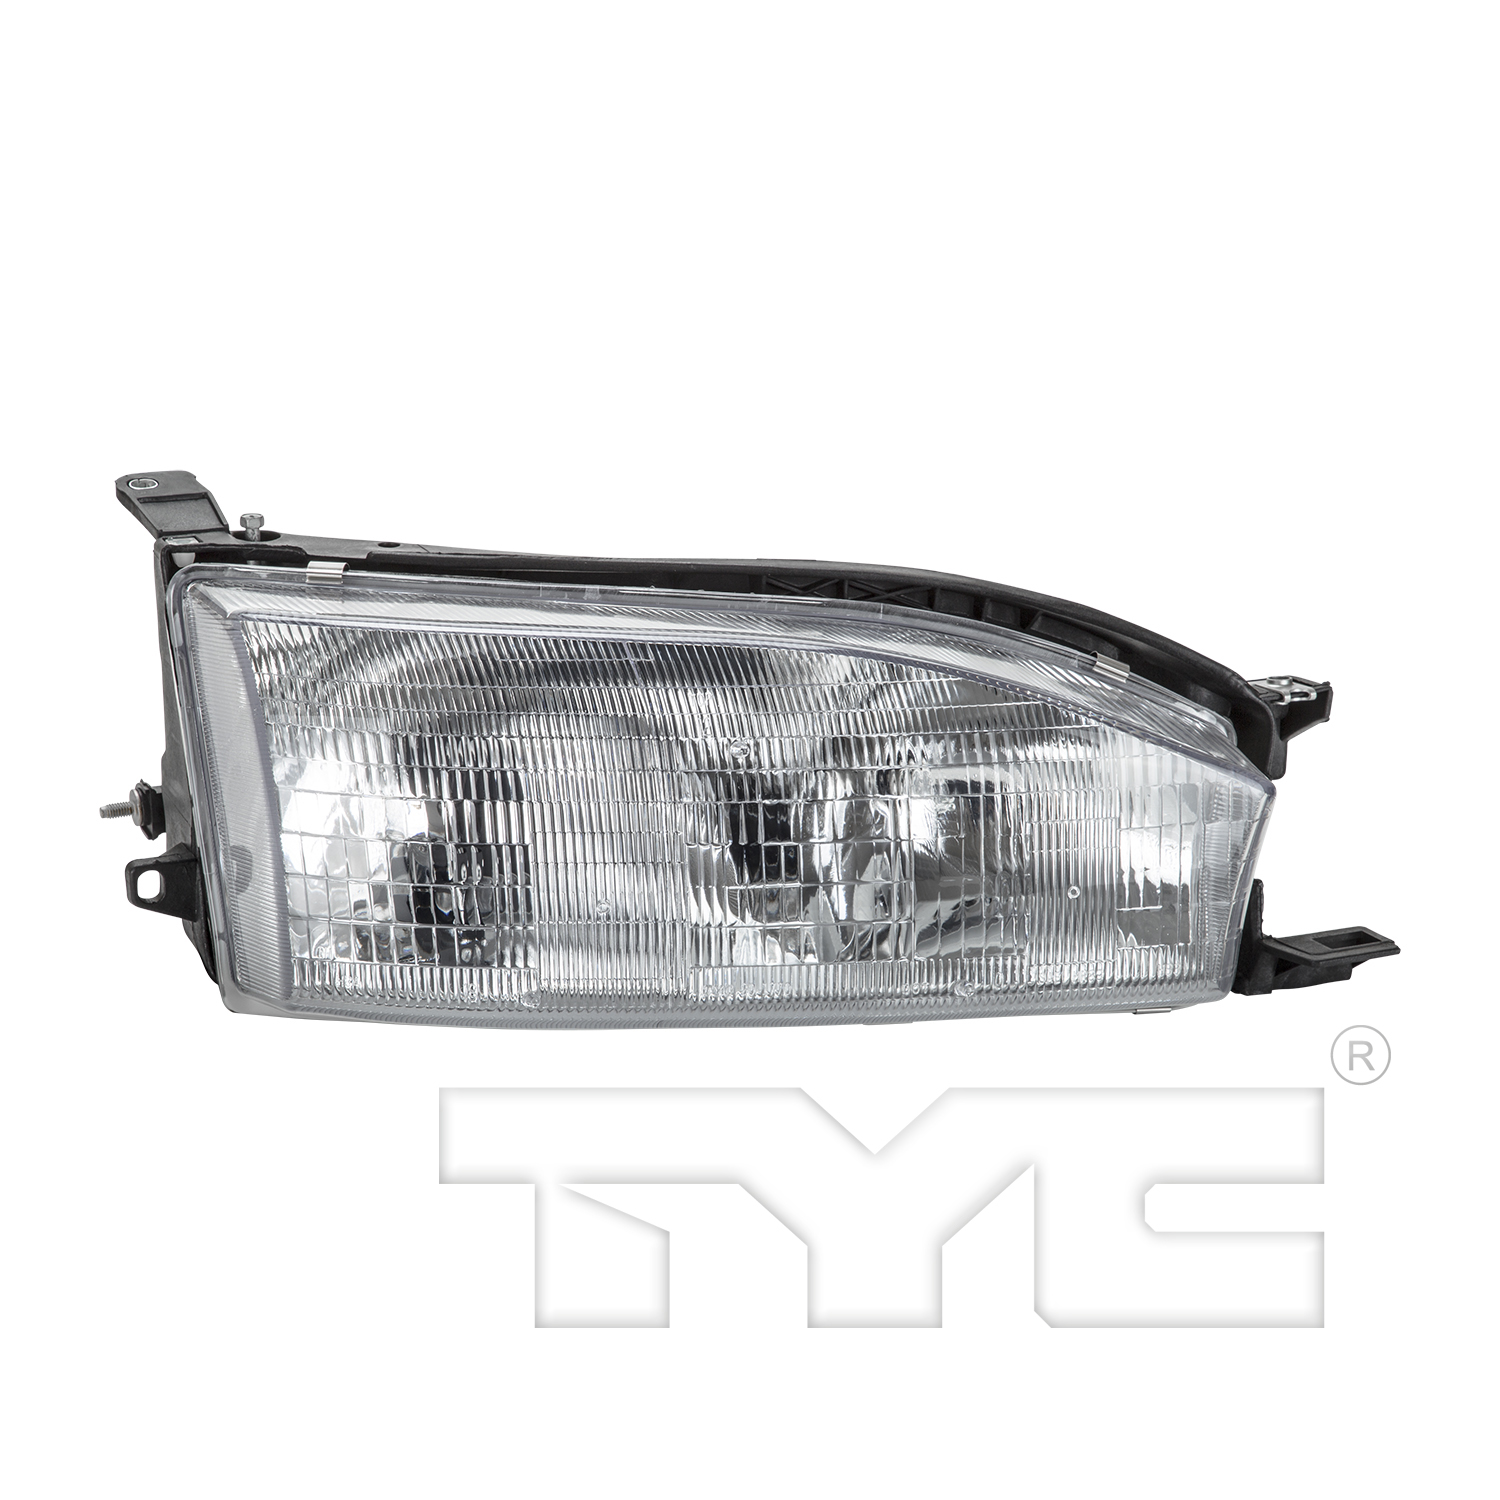 Aftermarket HEADLIGHTS for TOYOTA - CAMRY, CAMRY,92-94,RT Headlamp assy composite